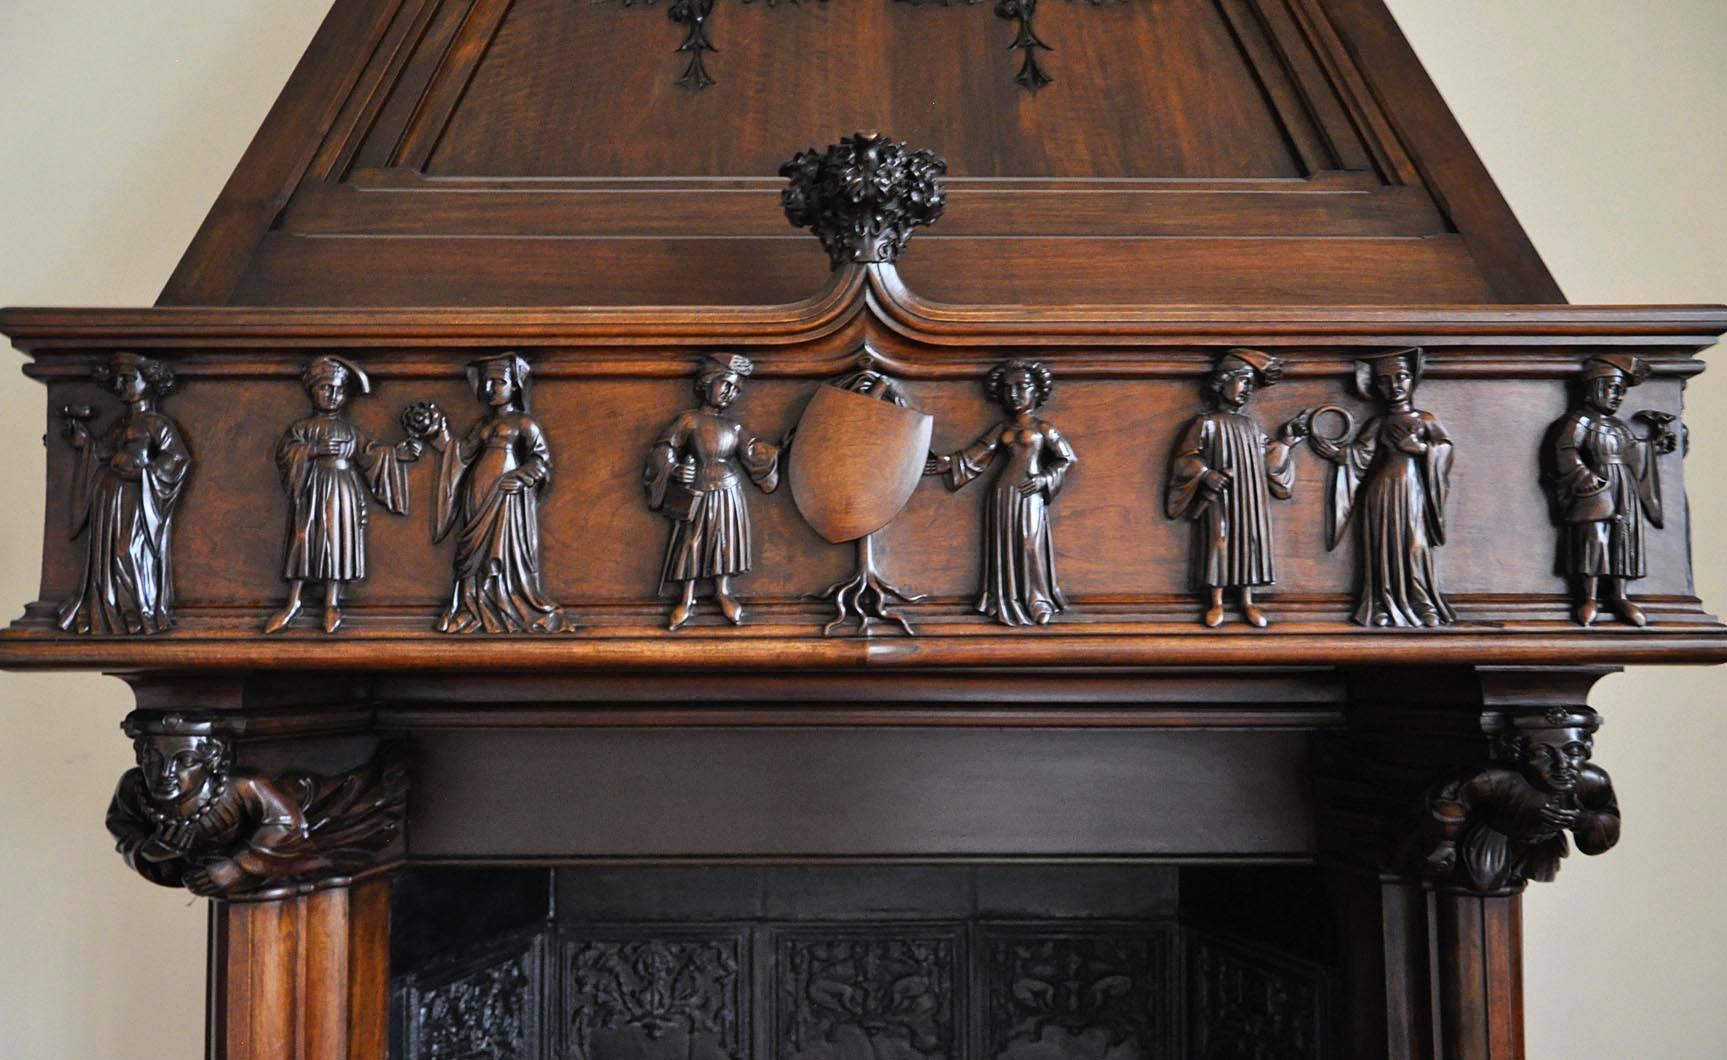 This monumental antique Neo-Gothic style fireplace was carved in walnut during the 19th century. 
The frieze is decorated with medieval courtly scenes. The fireplace is crowned by a trapezoidal hood with  manticores figures.
The fireplace is sold